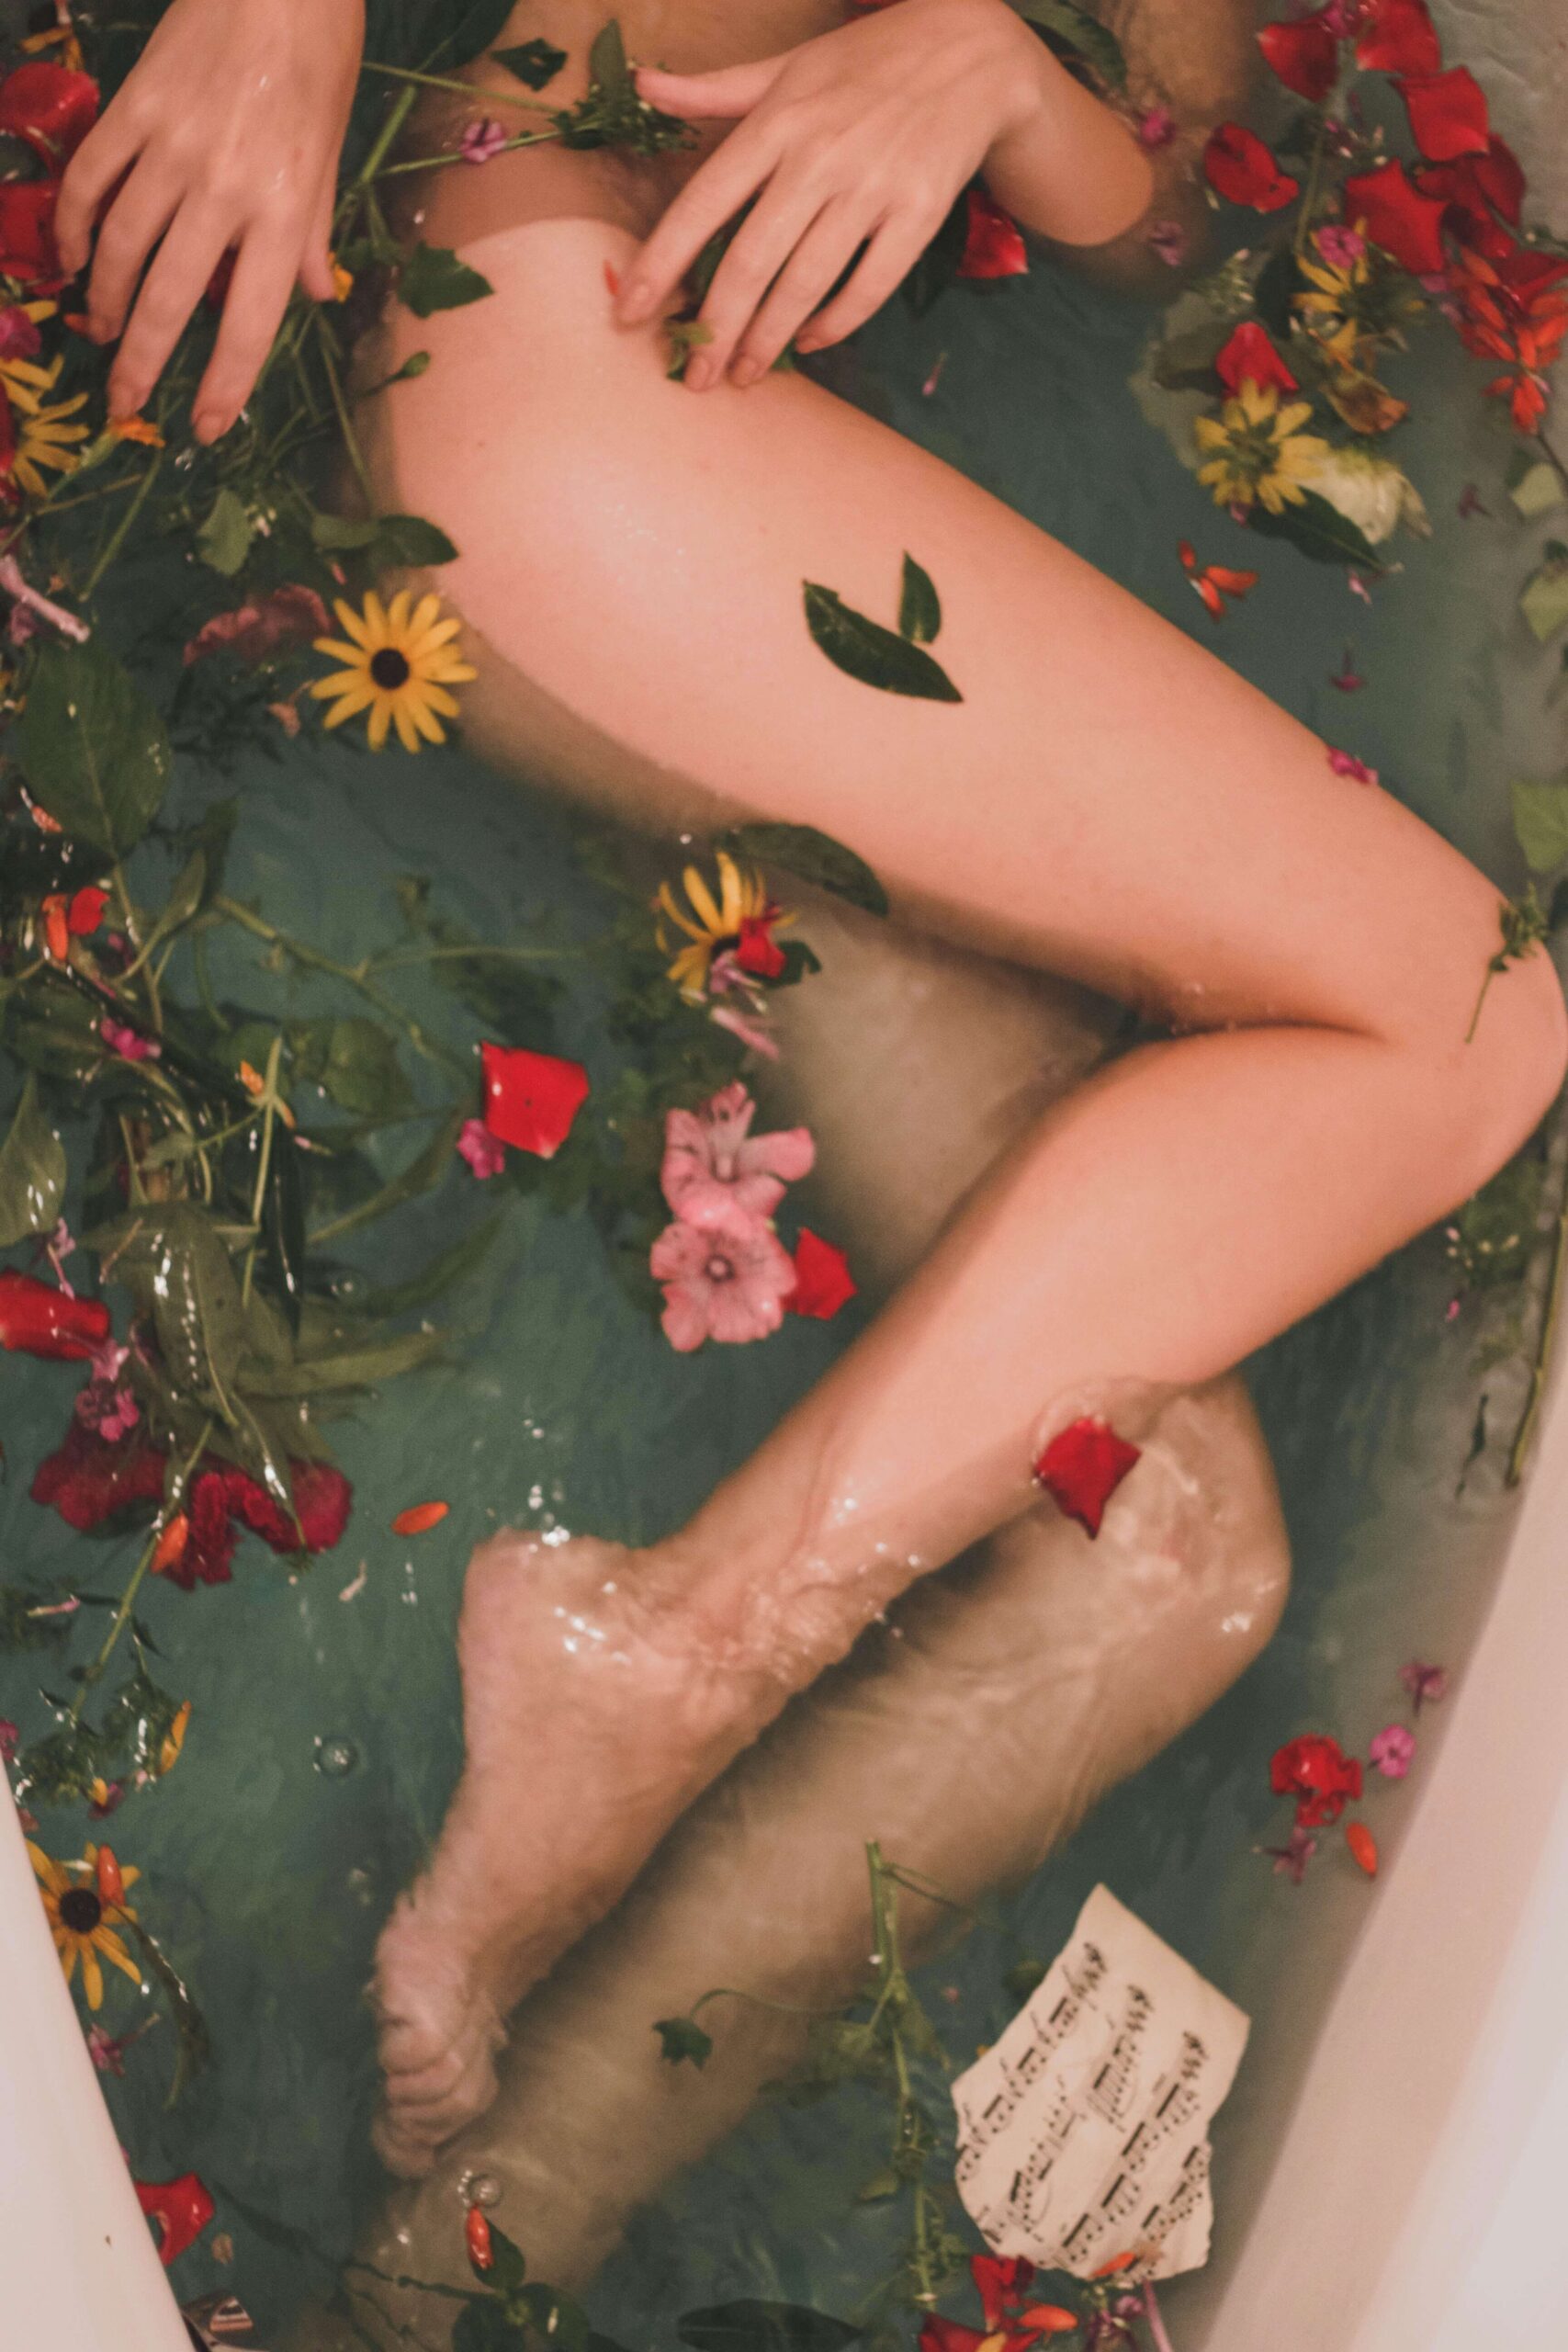 women in a bath surrounded by floating petals, looks serene and she's taking care of herself